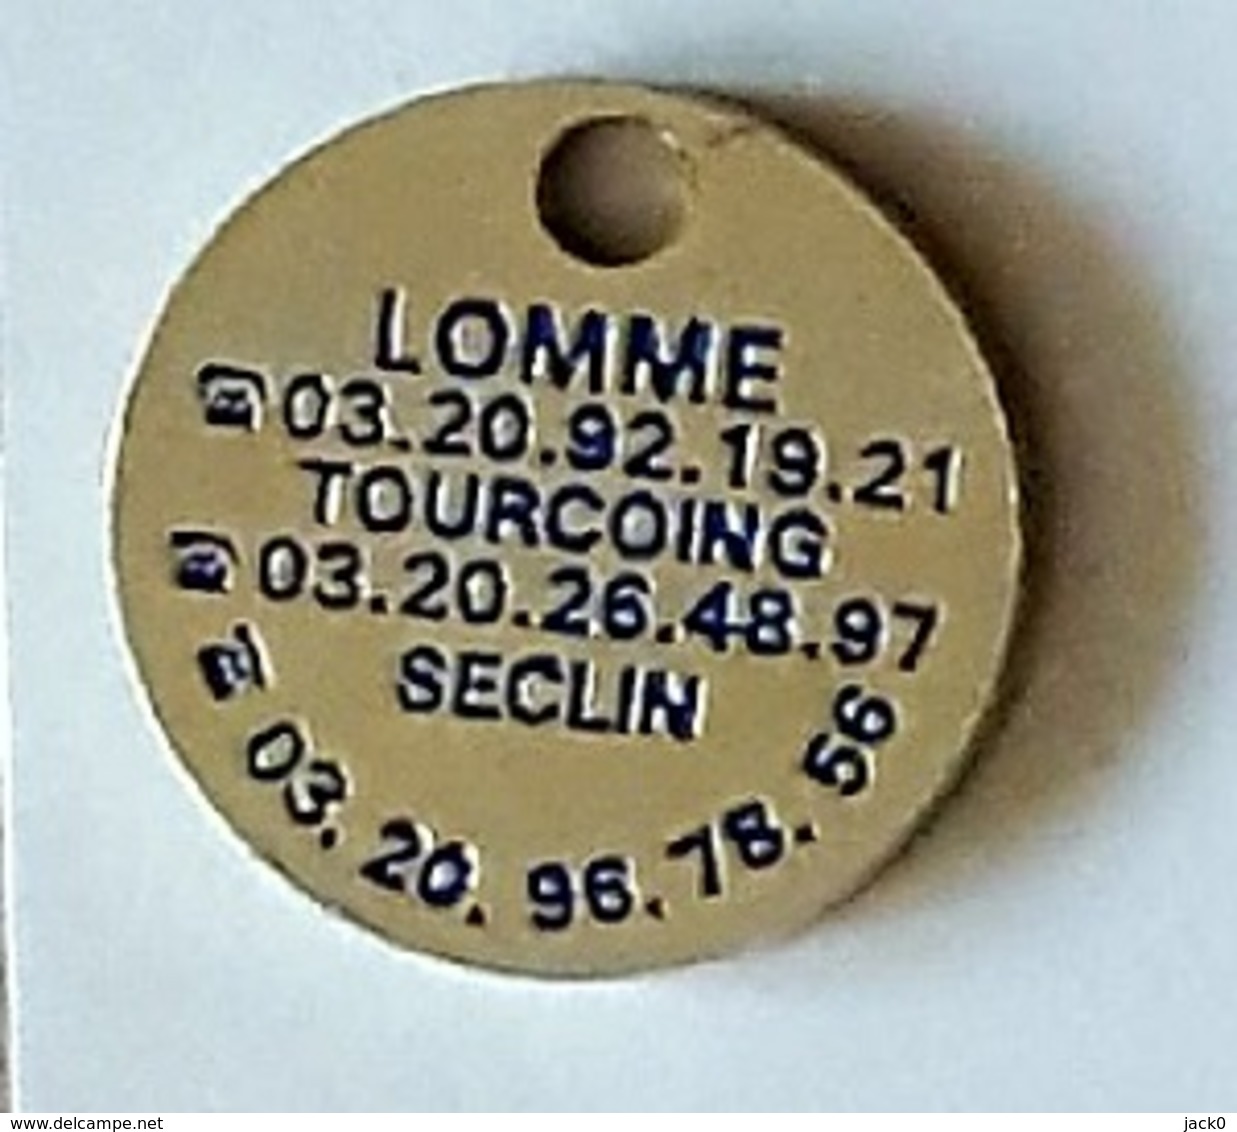 Jeton De Caddie  Argenté  Villes, Carburant  MORY  FIOUL  Performance  Verso  LOMME, TOURCOING, SECLIN  ( 59 ) - Trolley Token/Shopping Trolley Chip